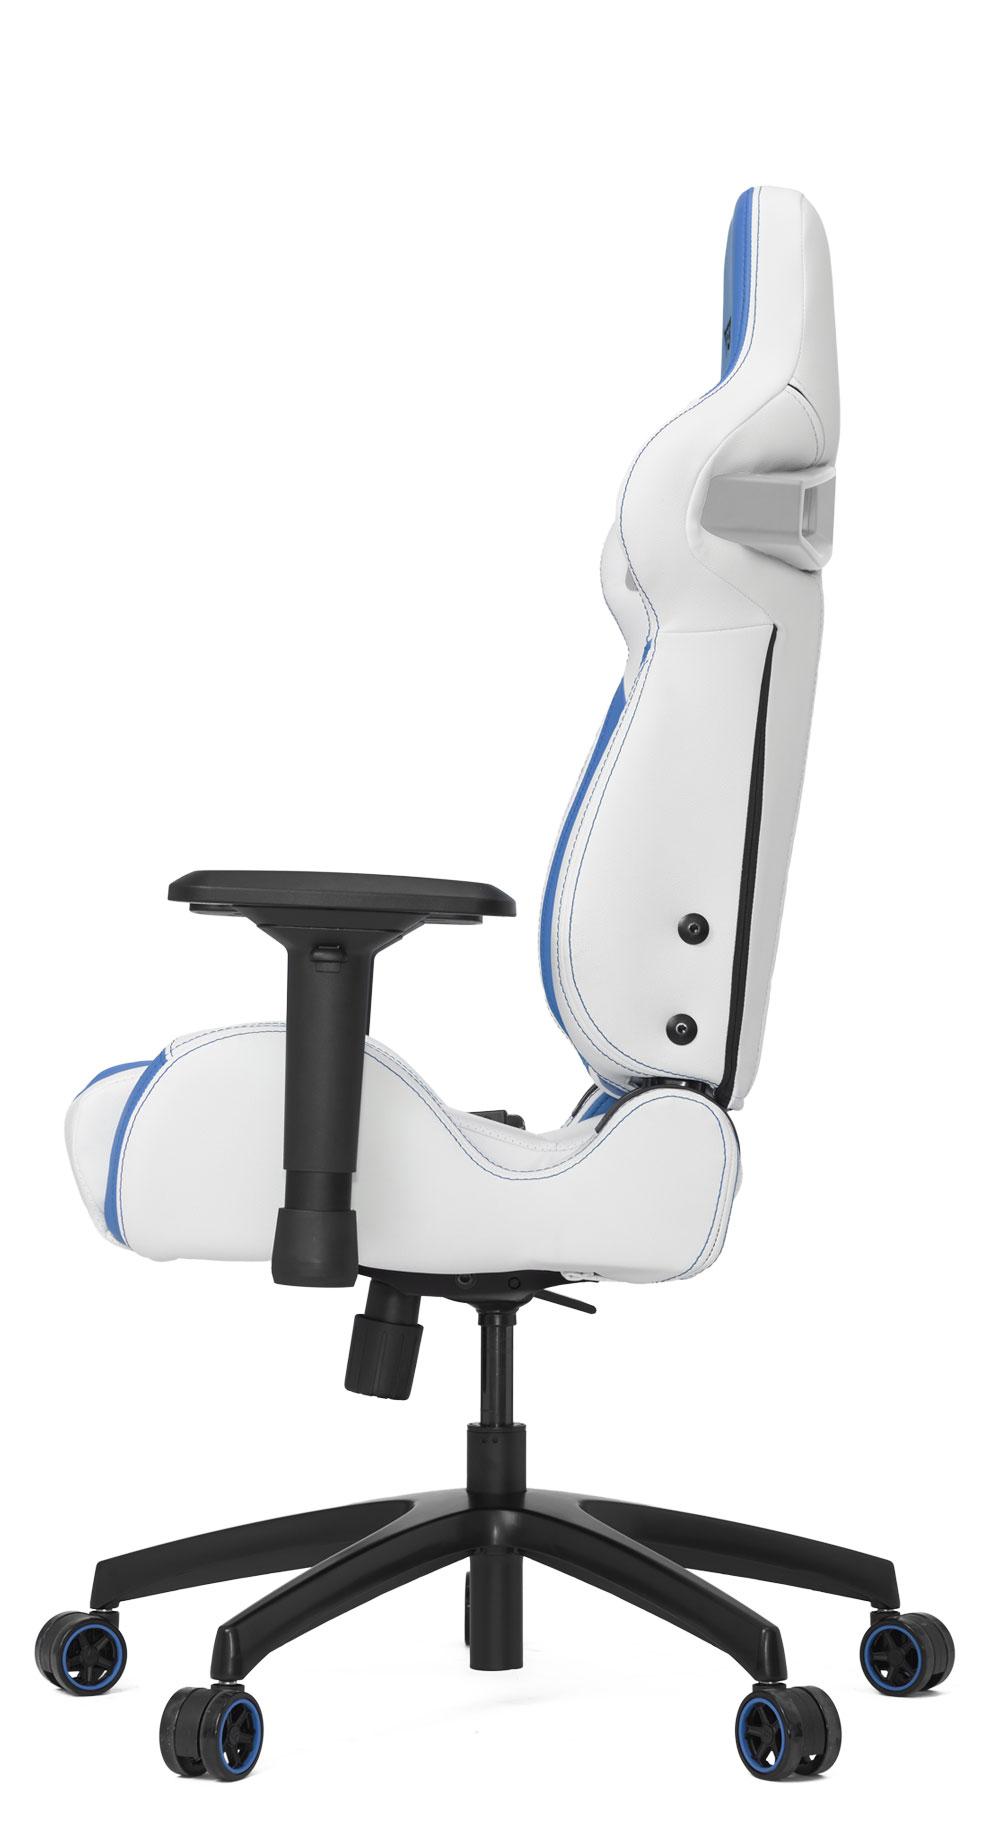 vertagear-racing-series-sl4000-white-and-blue-gaming-chair-1000px-v10004.jpg